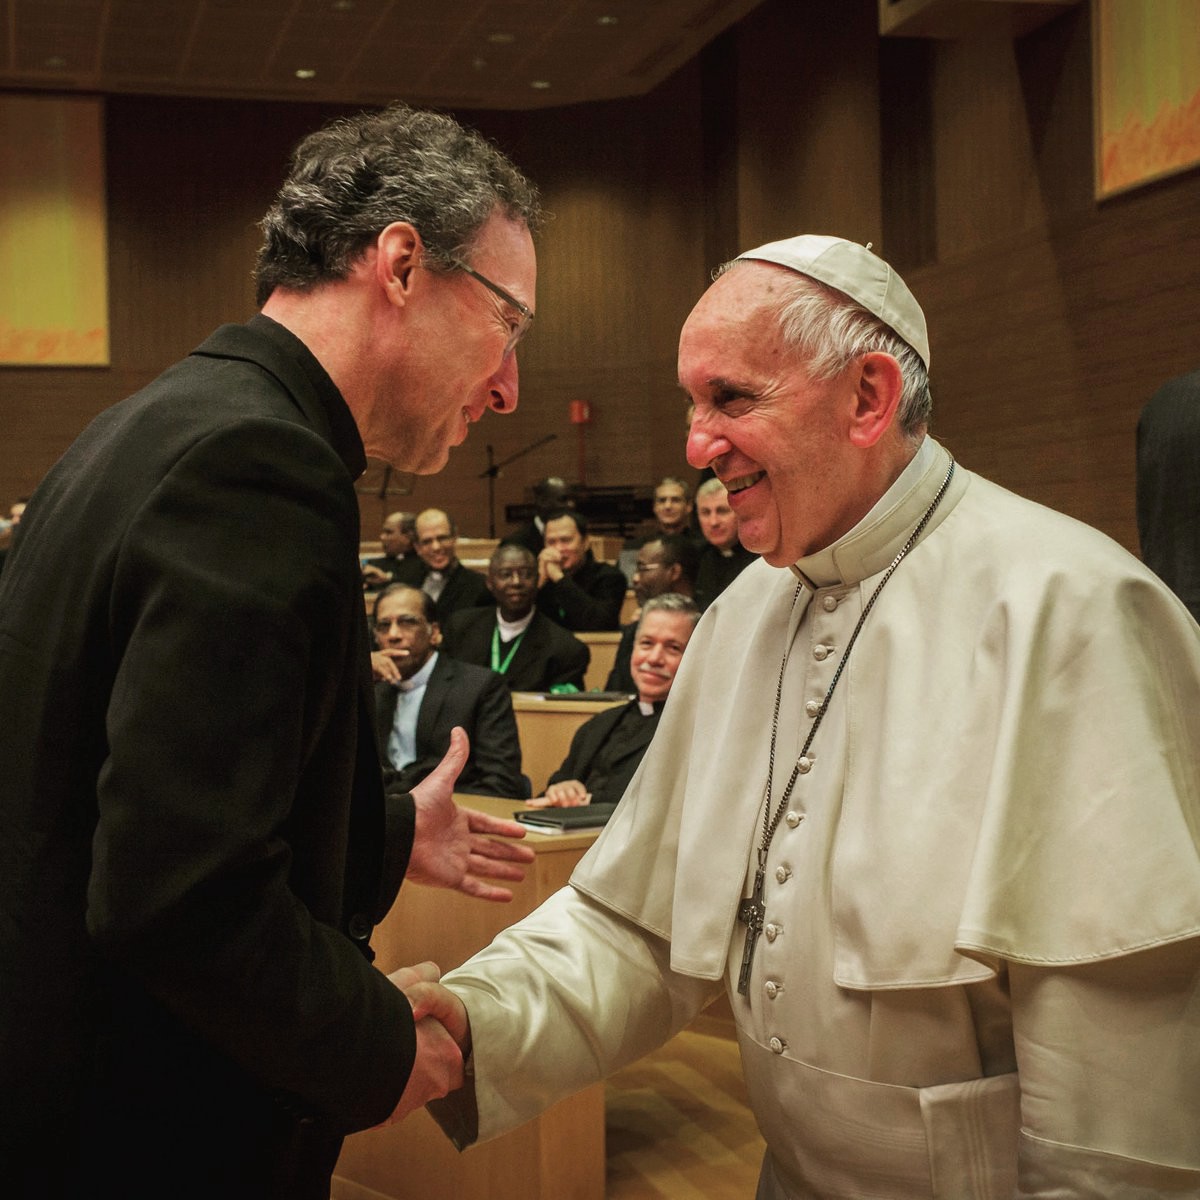 Fr. Stegman meets the pope